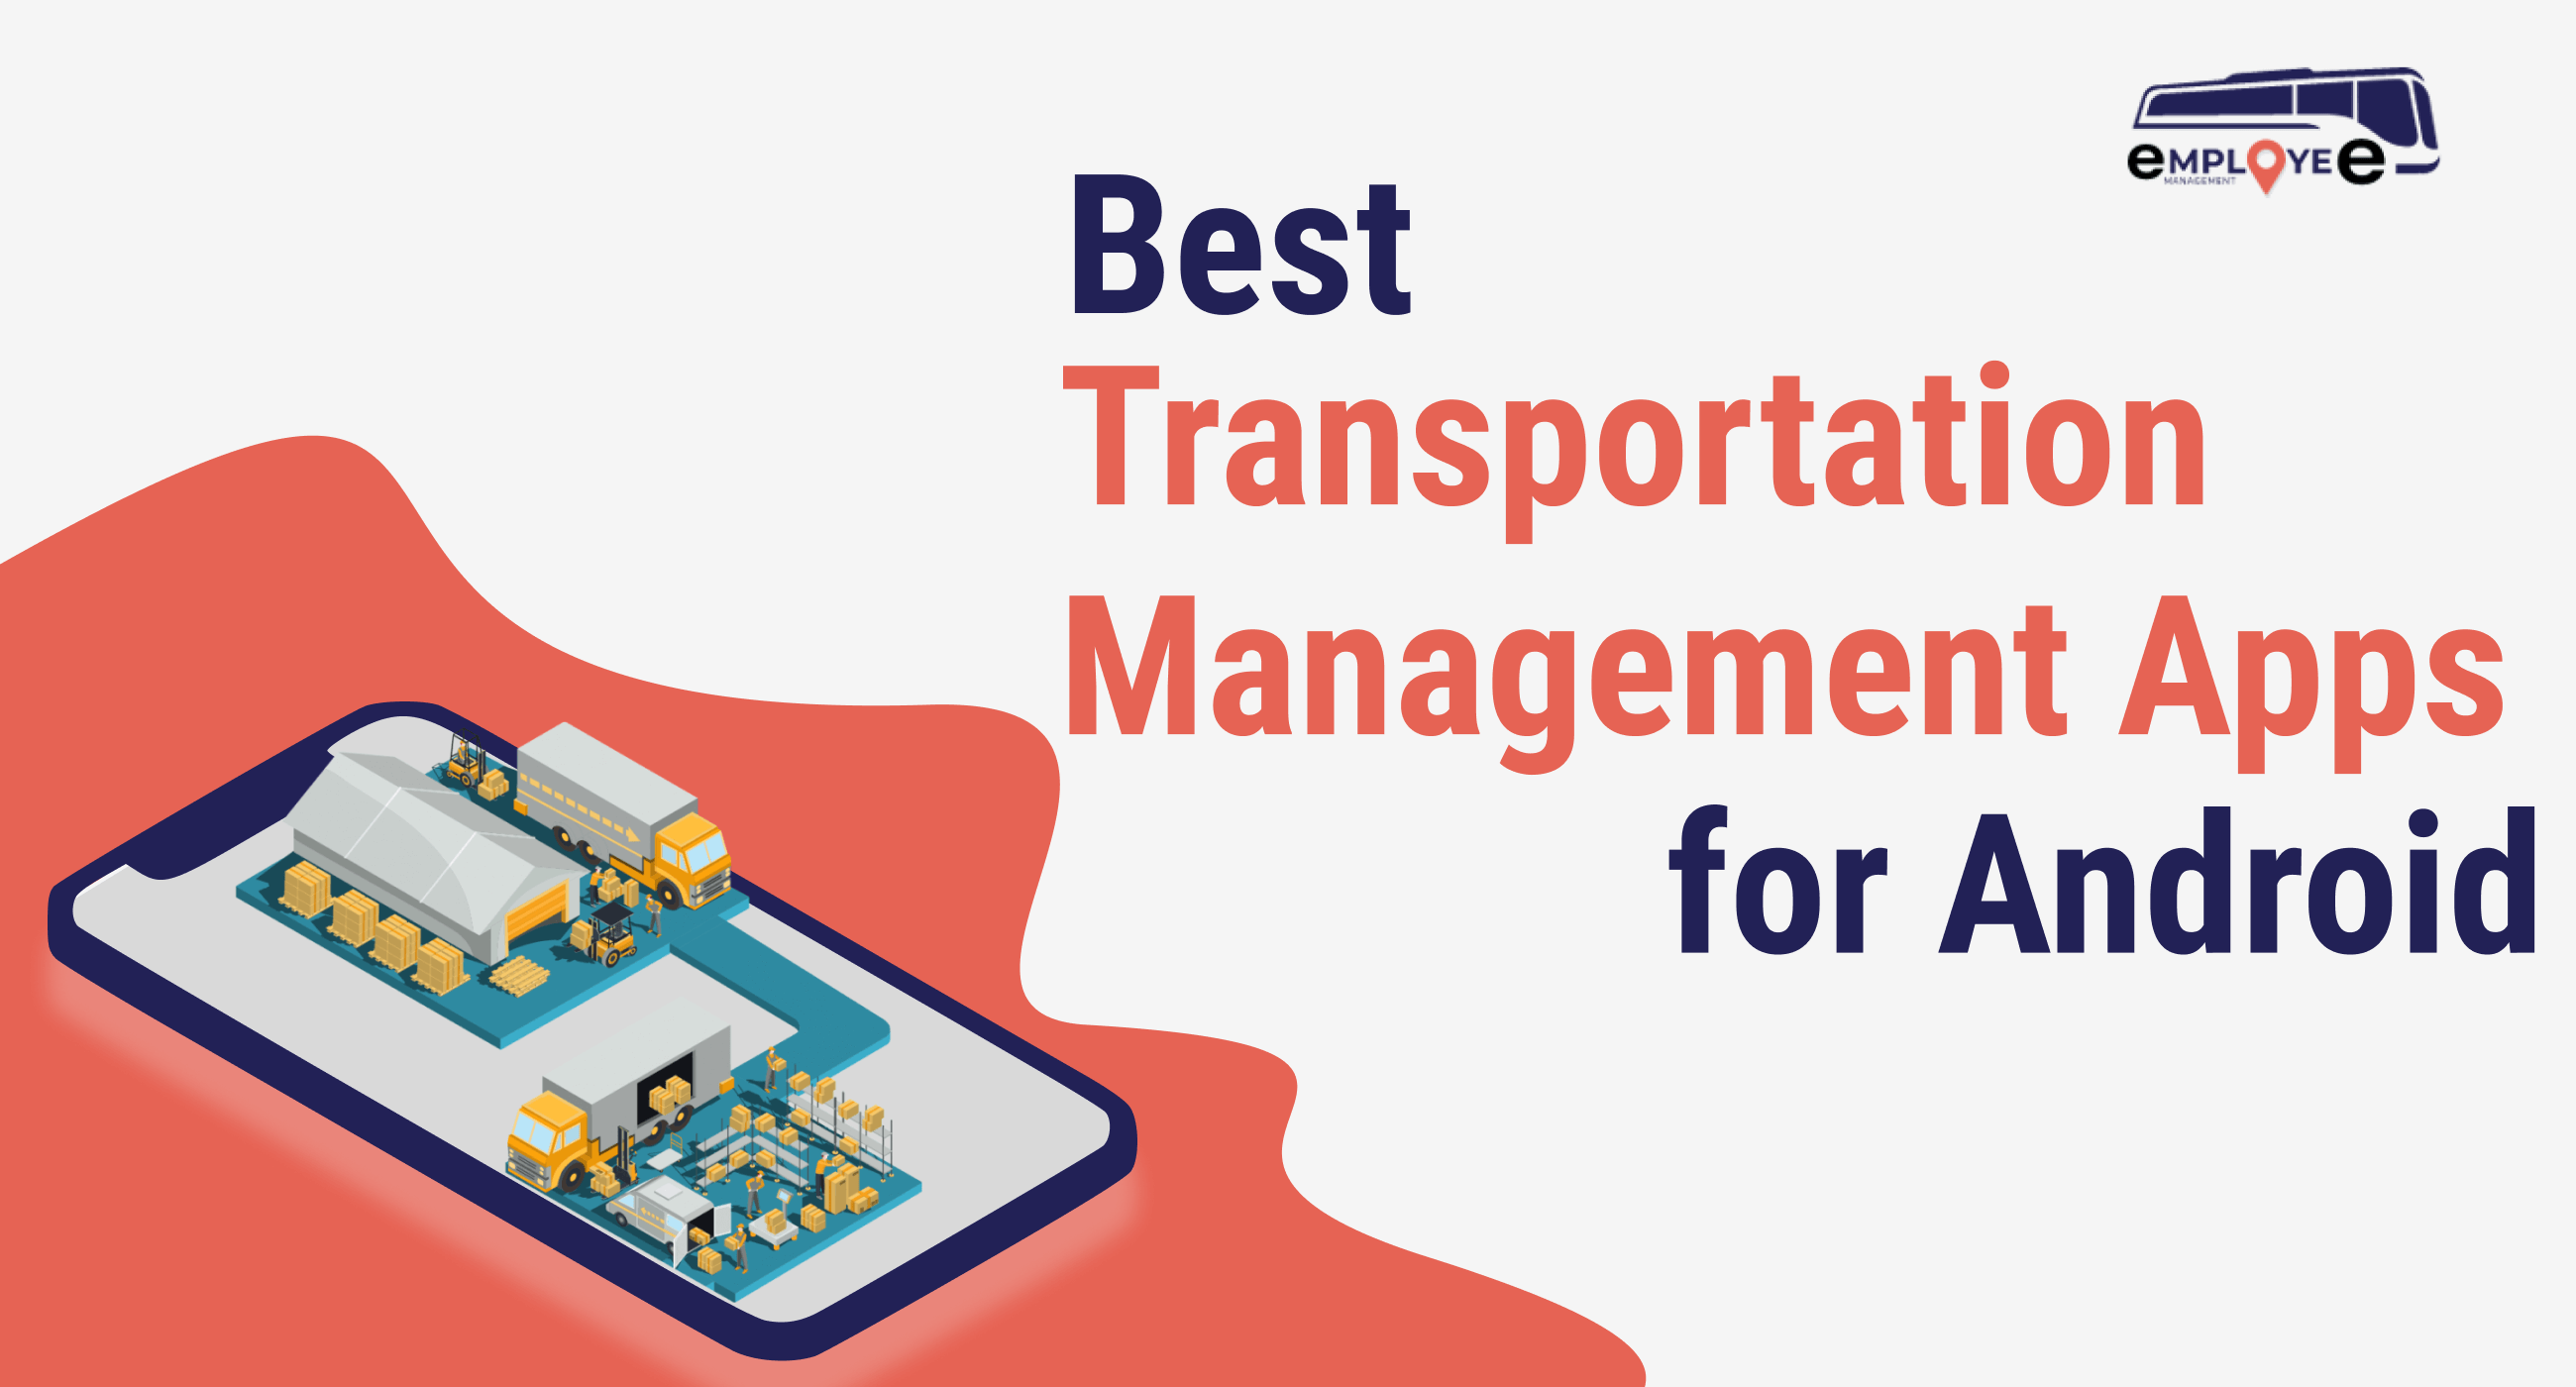 Best Transportation Management Apps for Android